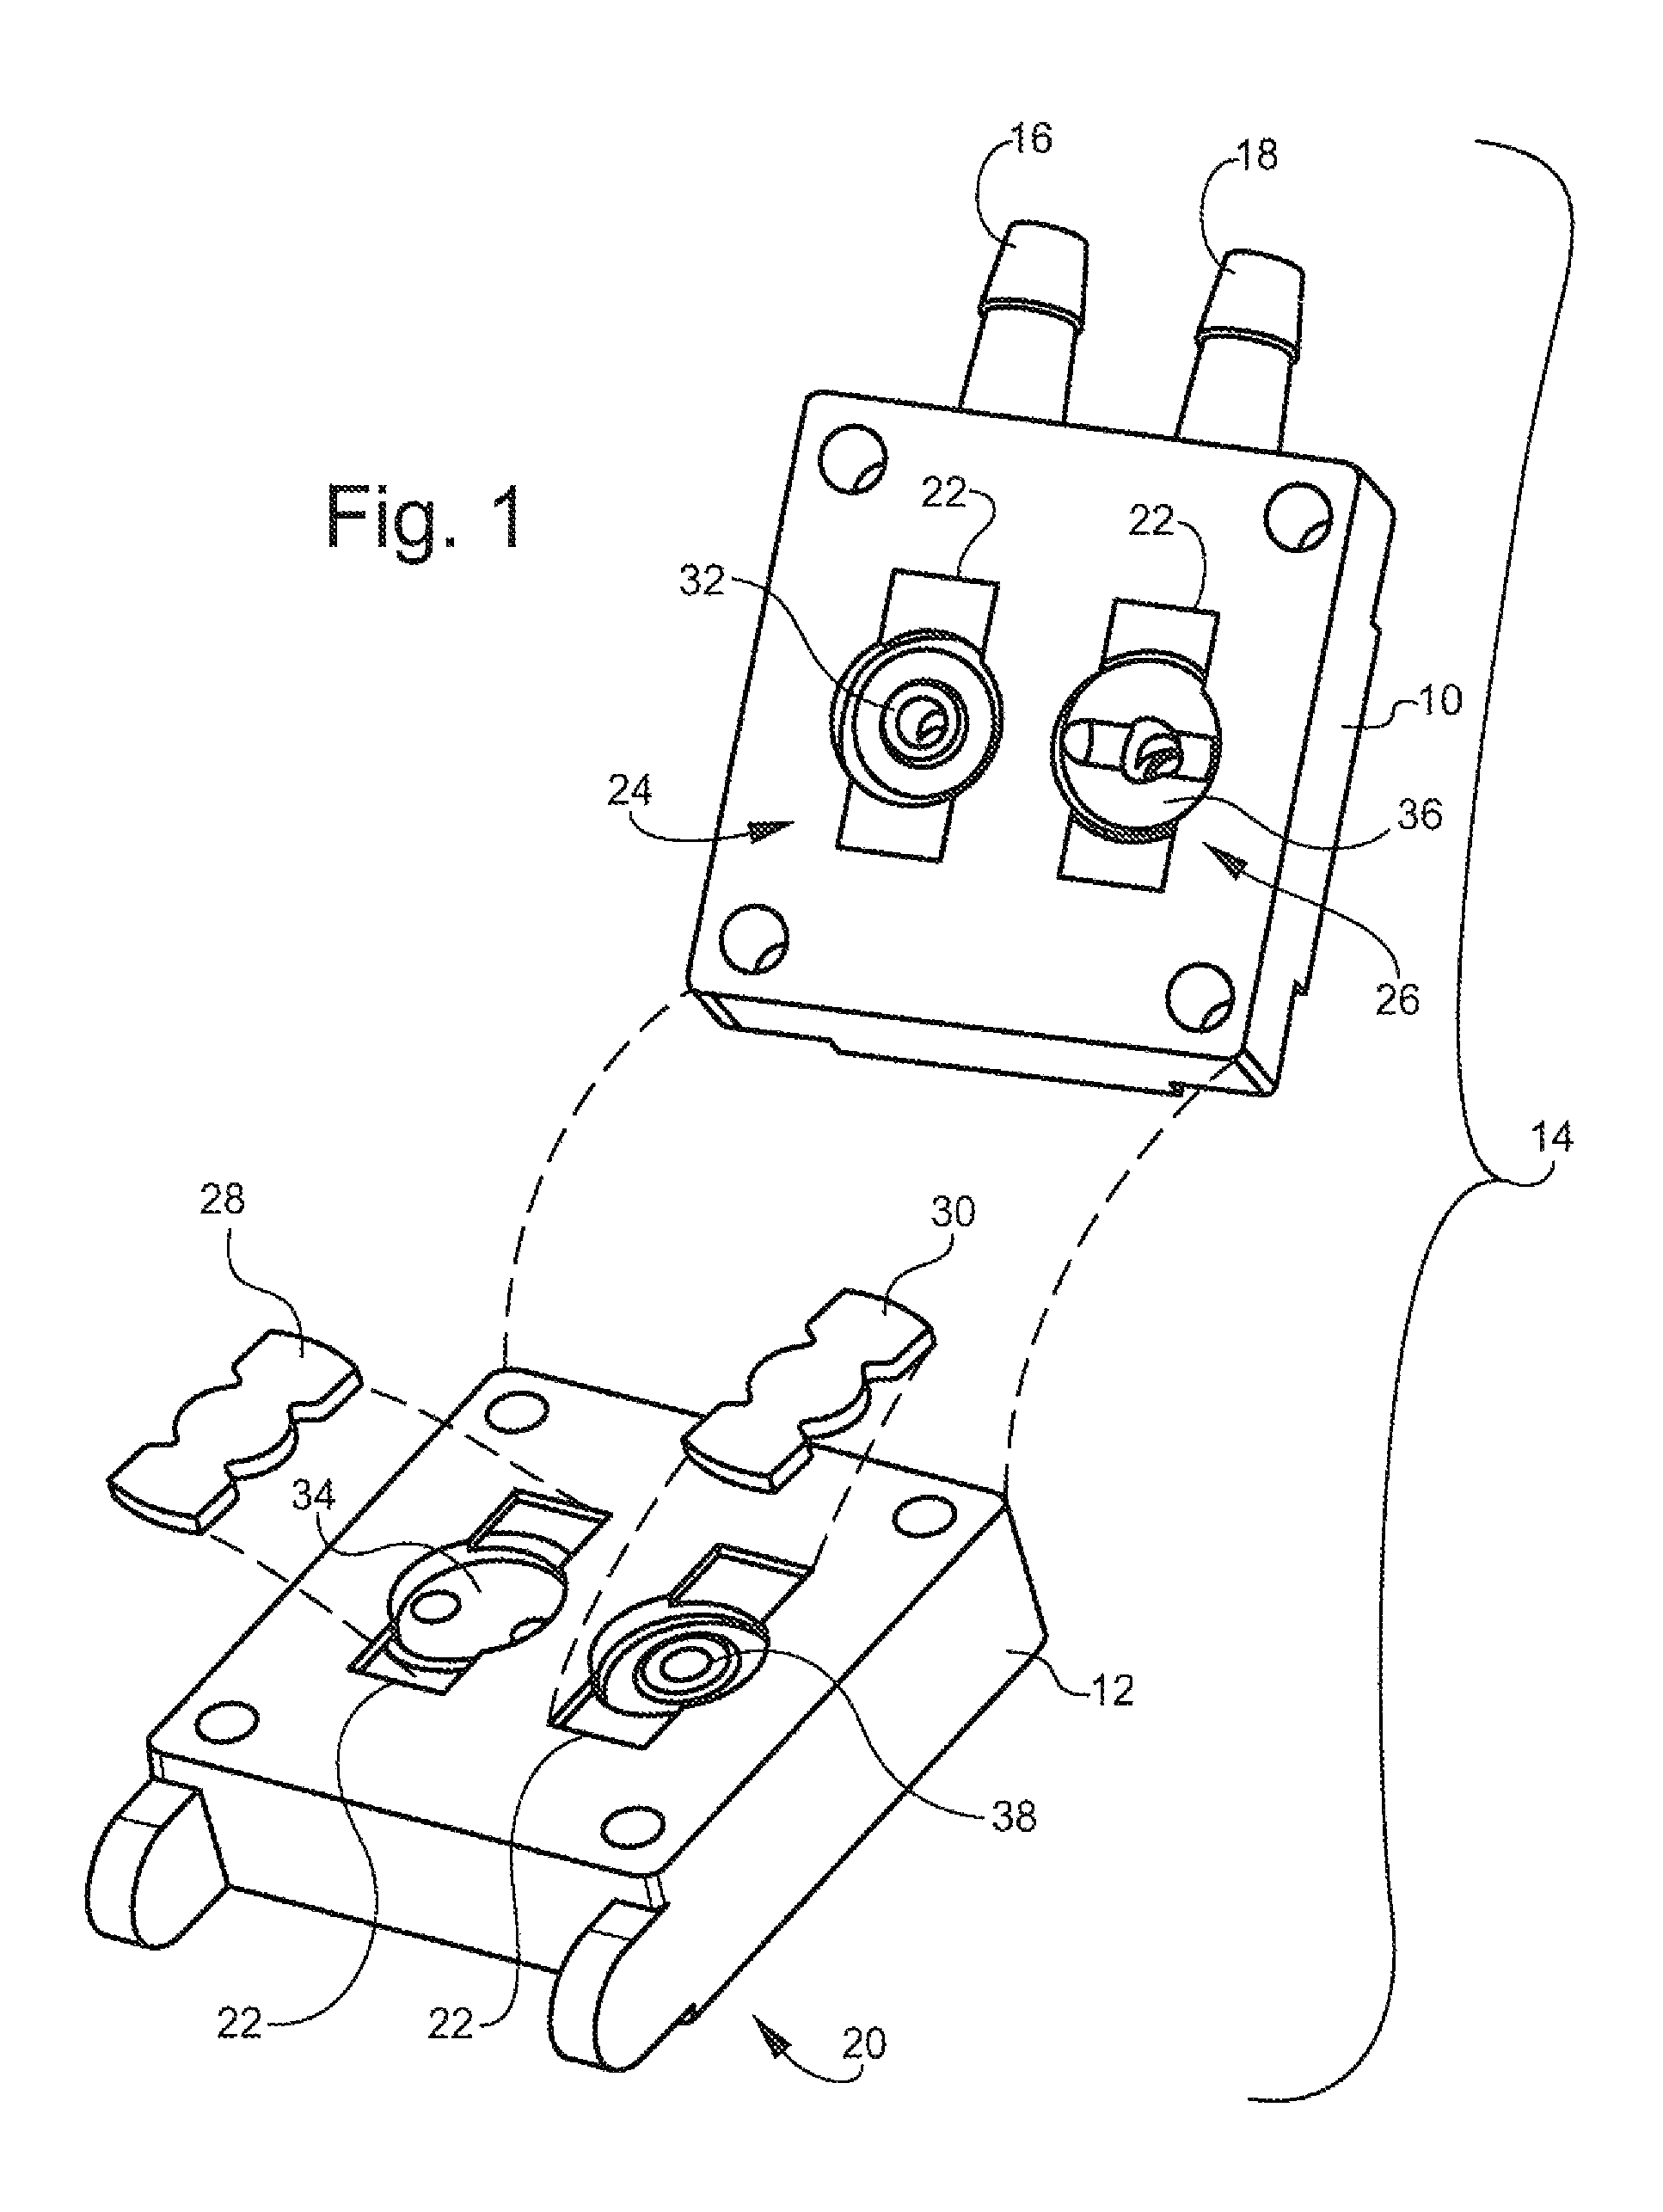 Pump valve with controlled stroke